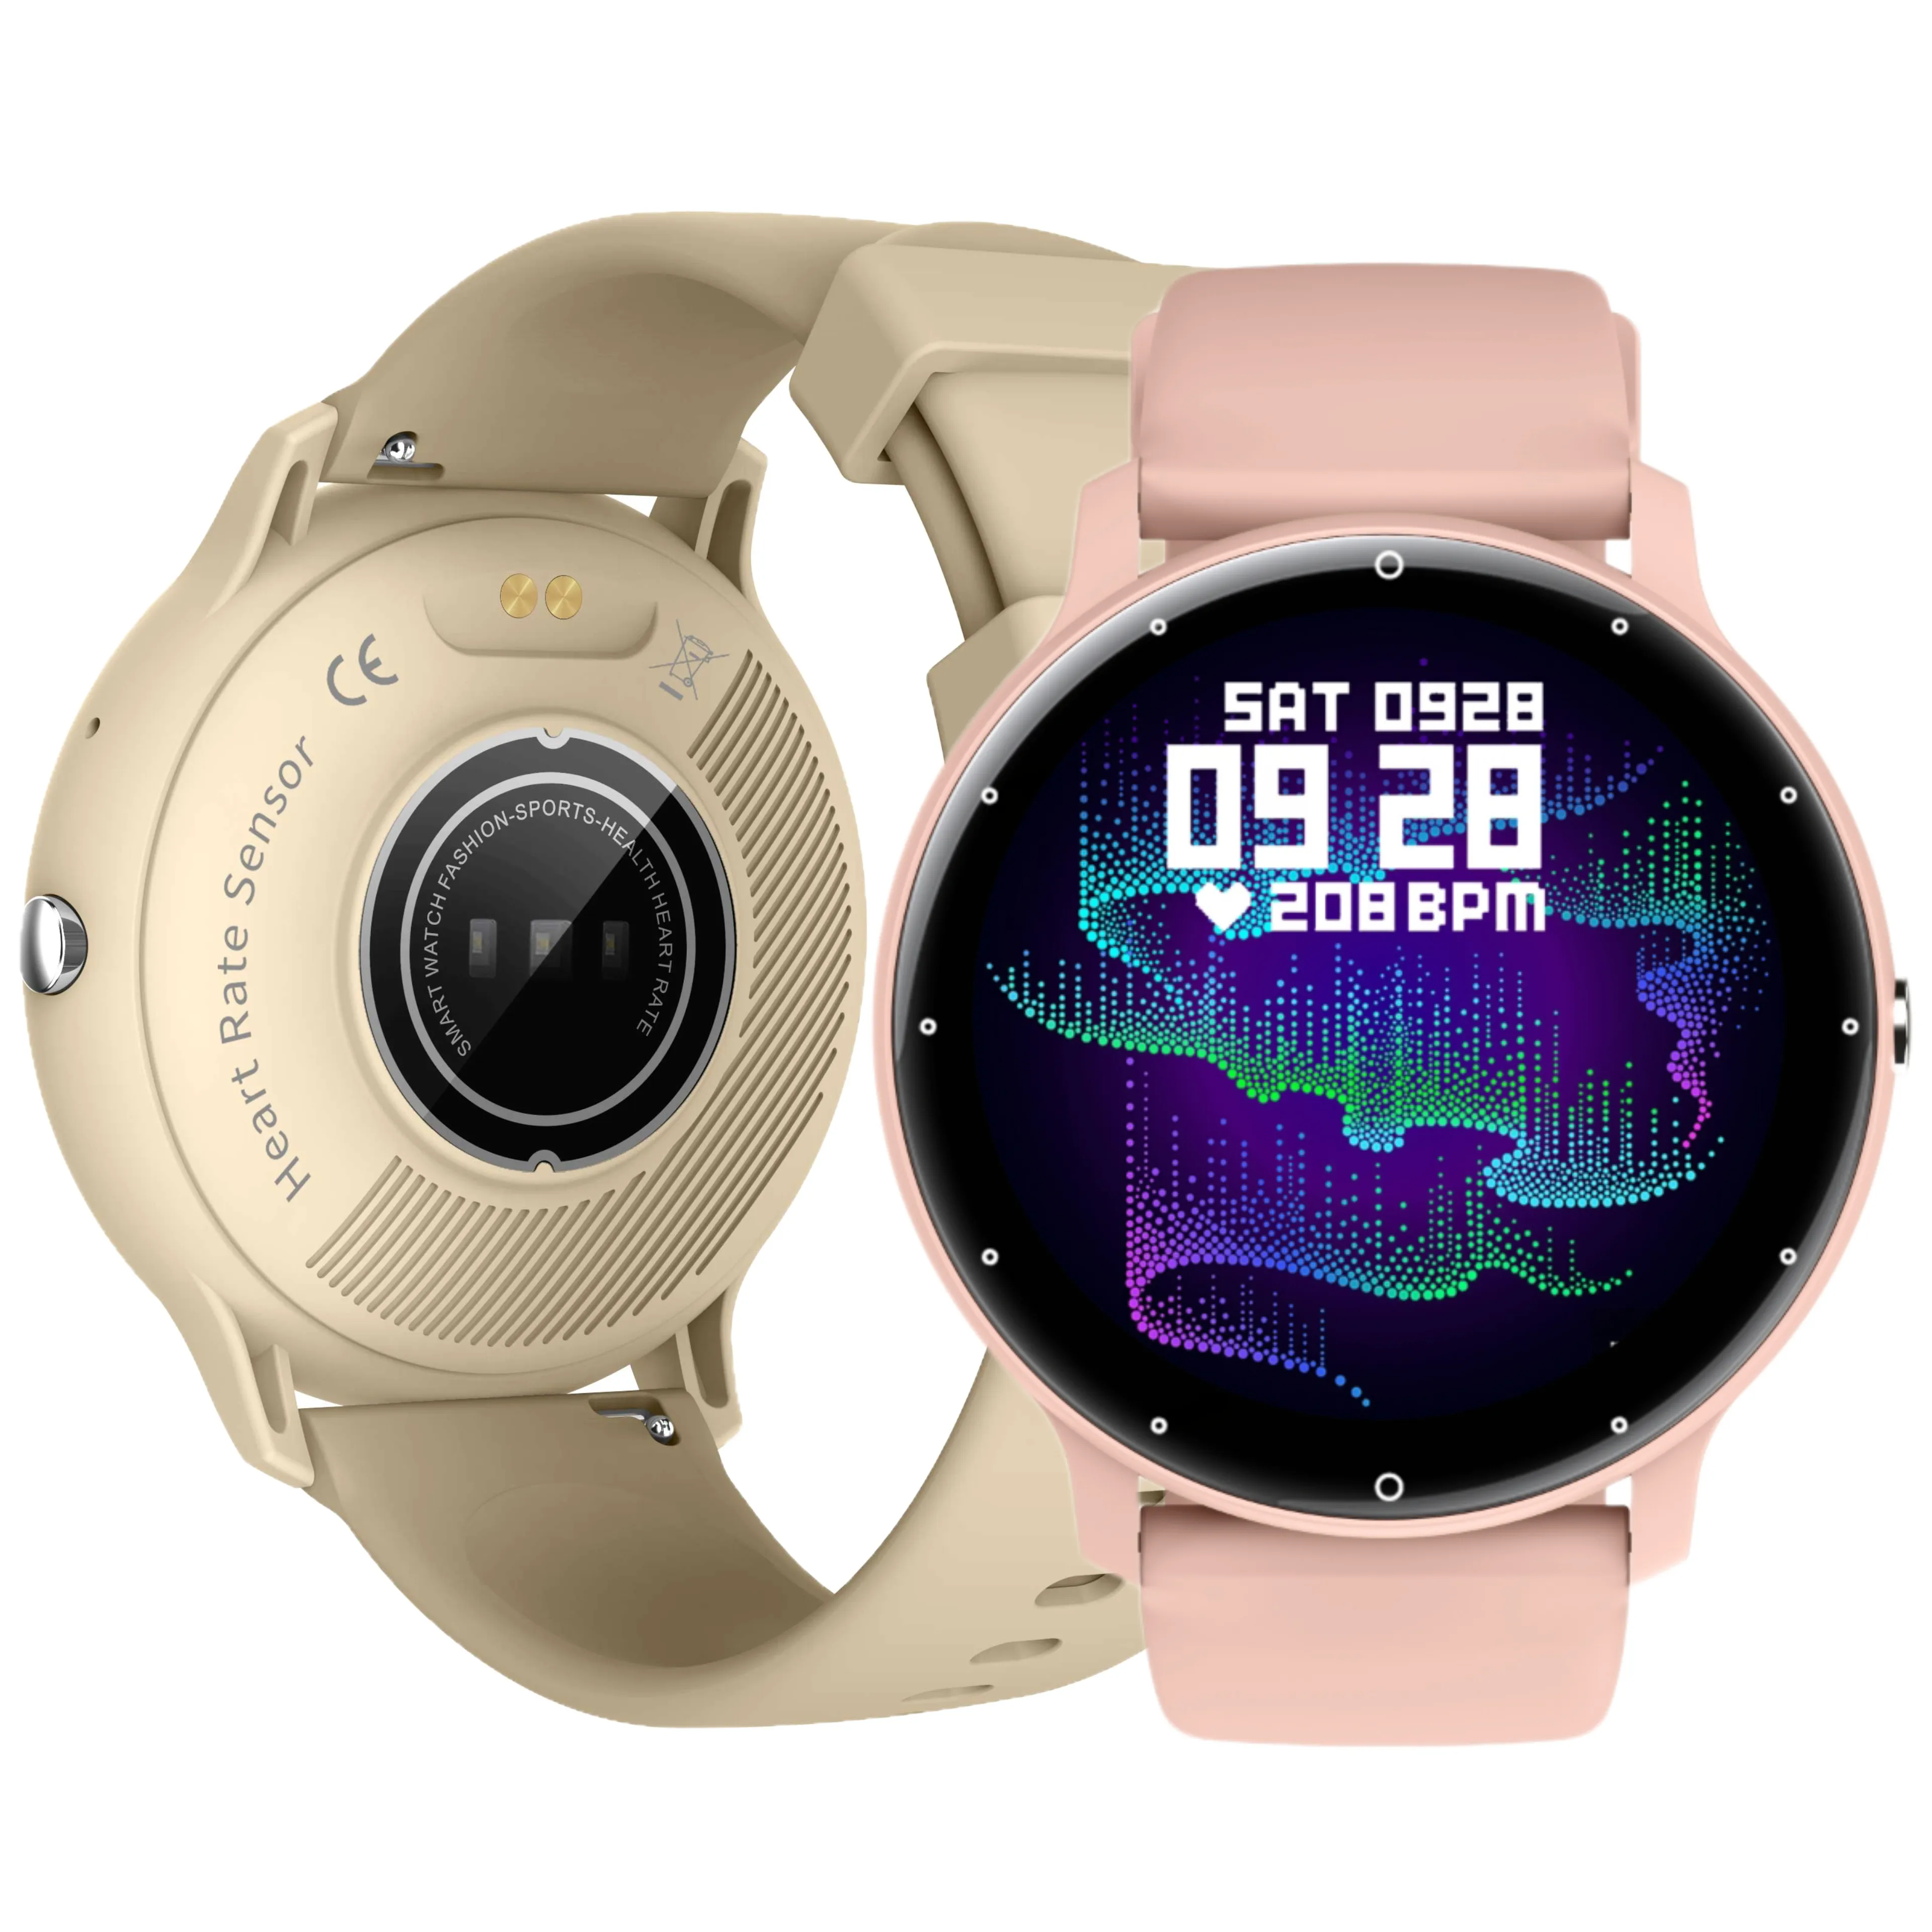 Ip67 Waterproof Bt5.2 Smartwatch With Full Screen Touch App Control Sports Monitoring Multiple Health Monitoring Call Features